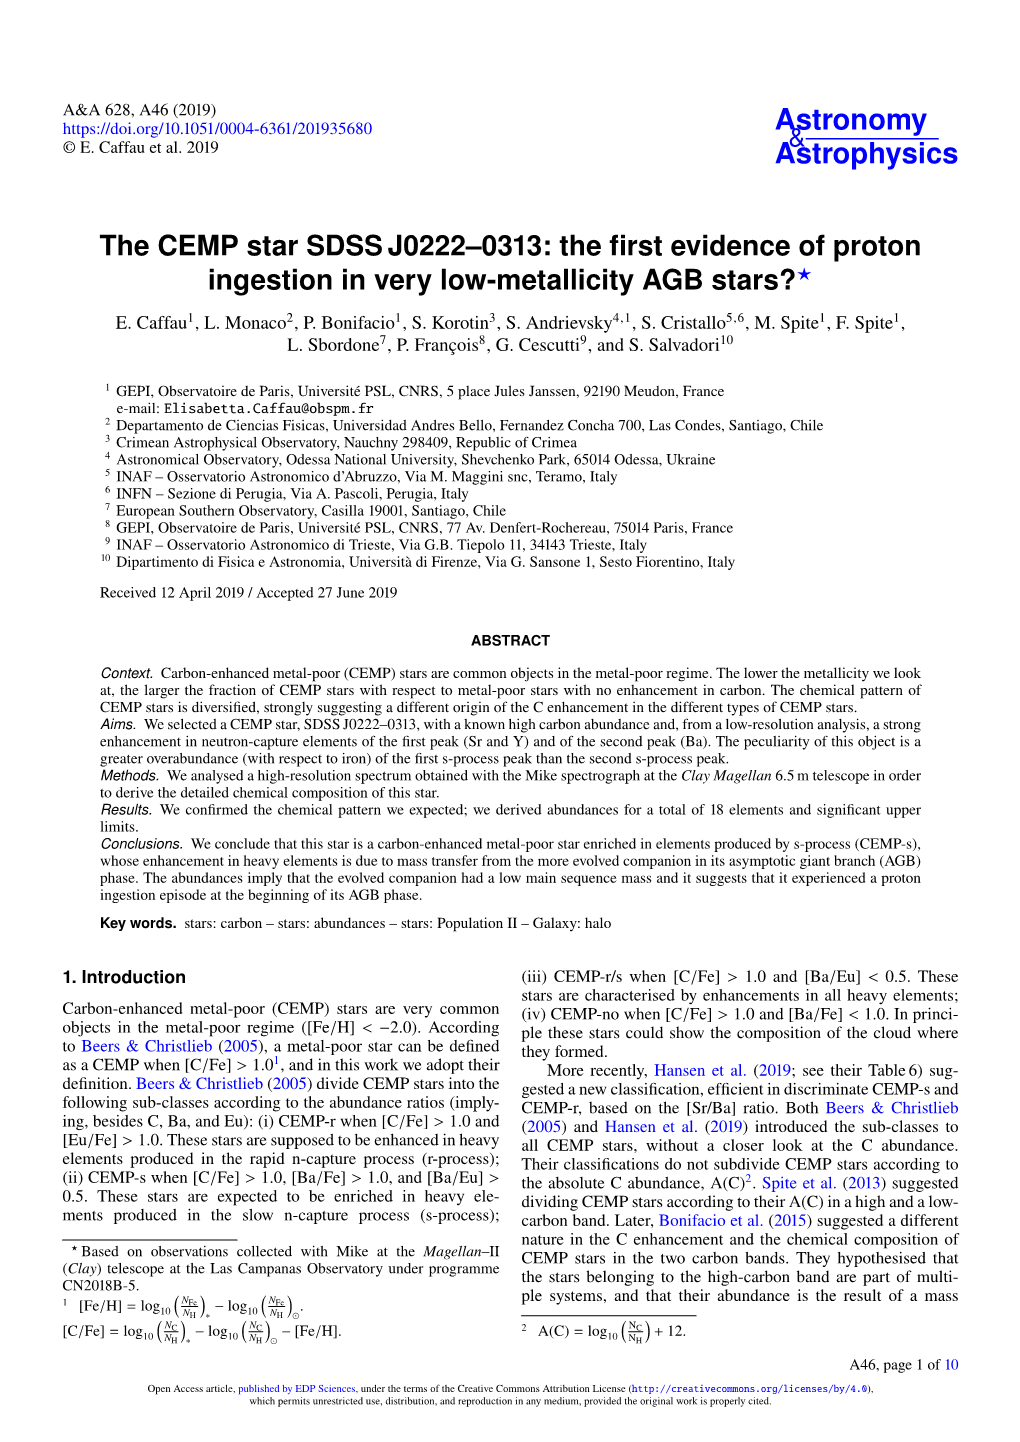 The CEMP Star SDSS J0222–0313: the First Evidence of Proton